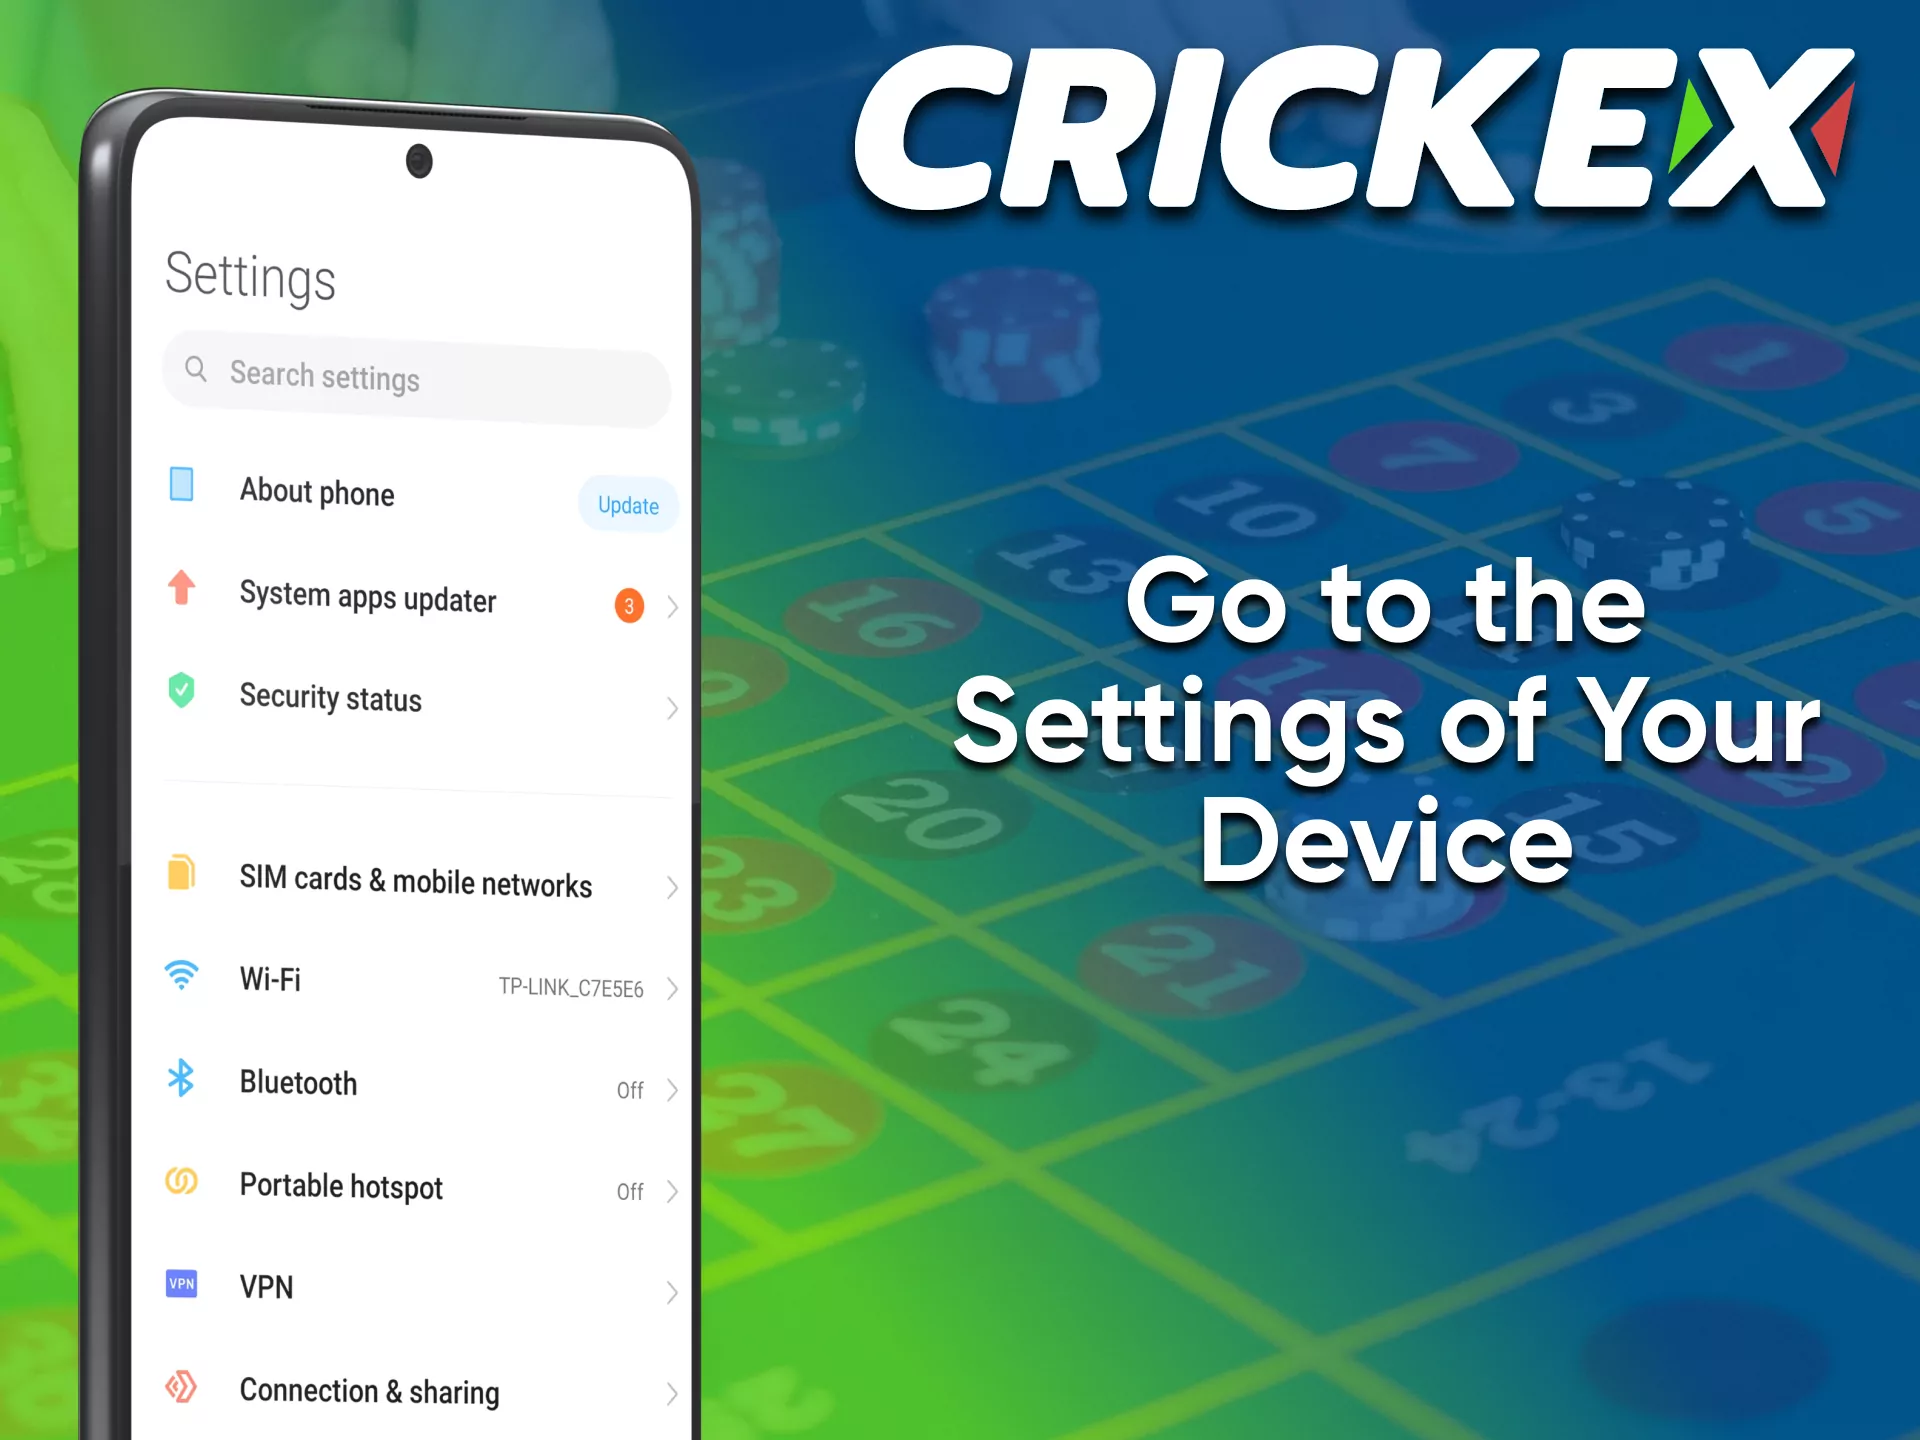 Use the settings device to install the Сrickex app.